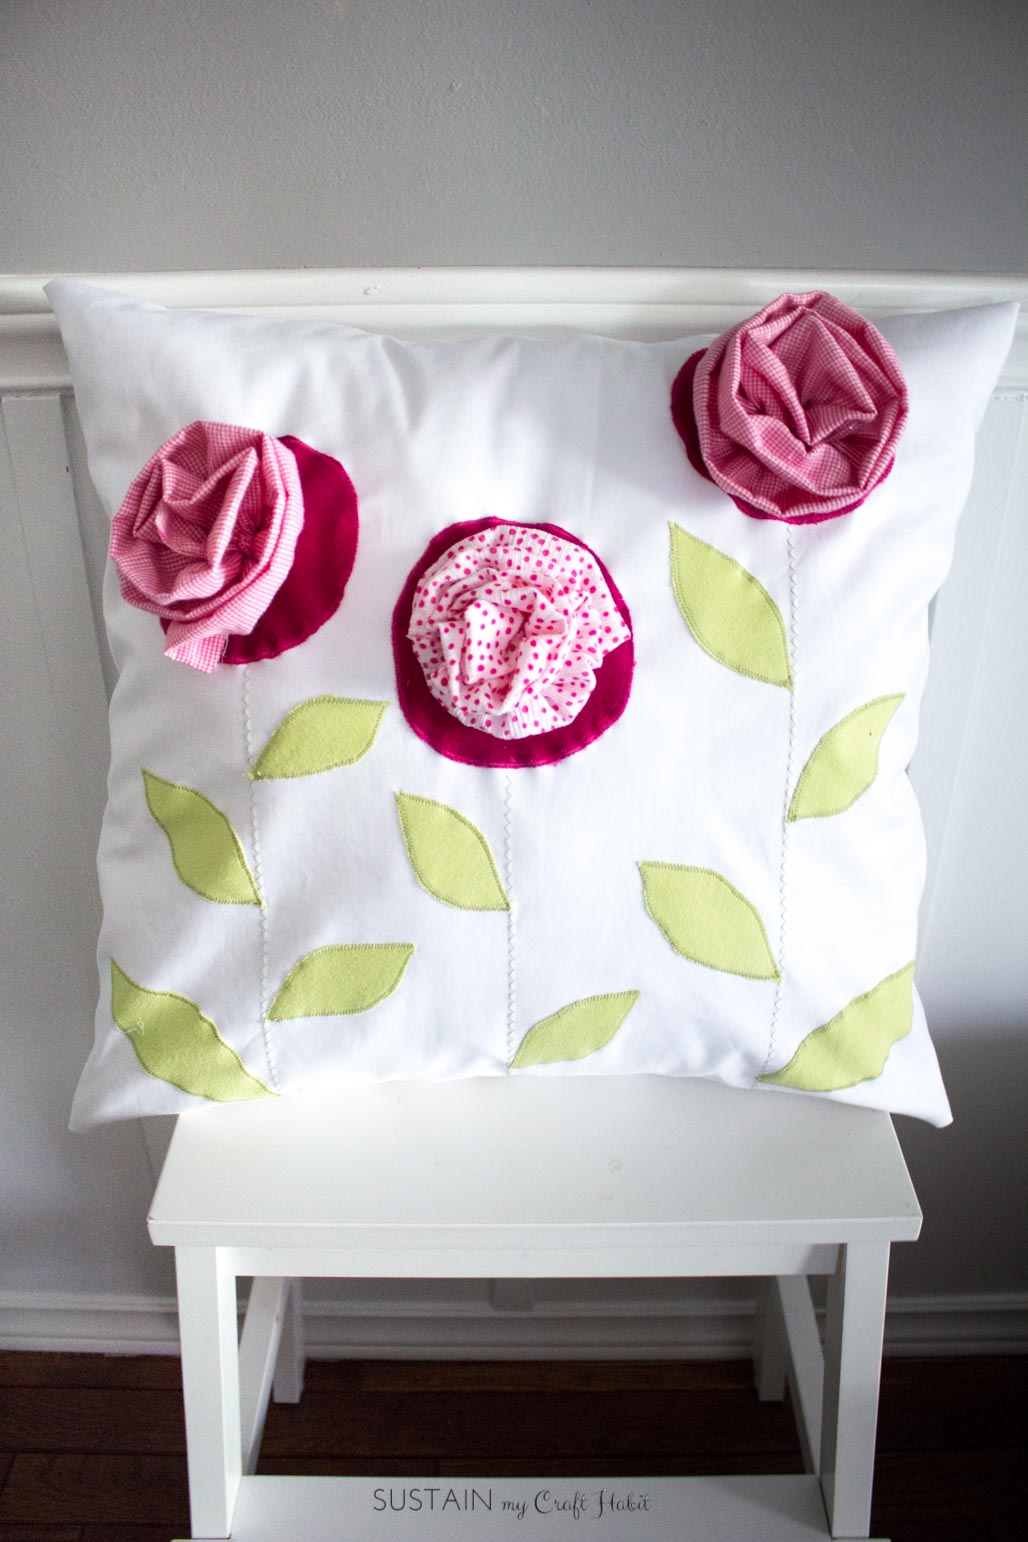 Throw pillow made with outgrown baby clothing. A DIY upcycling handmade gift idea.